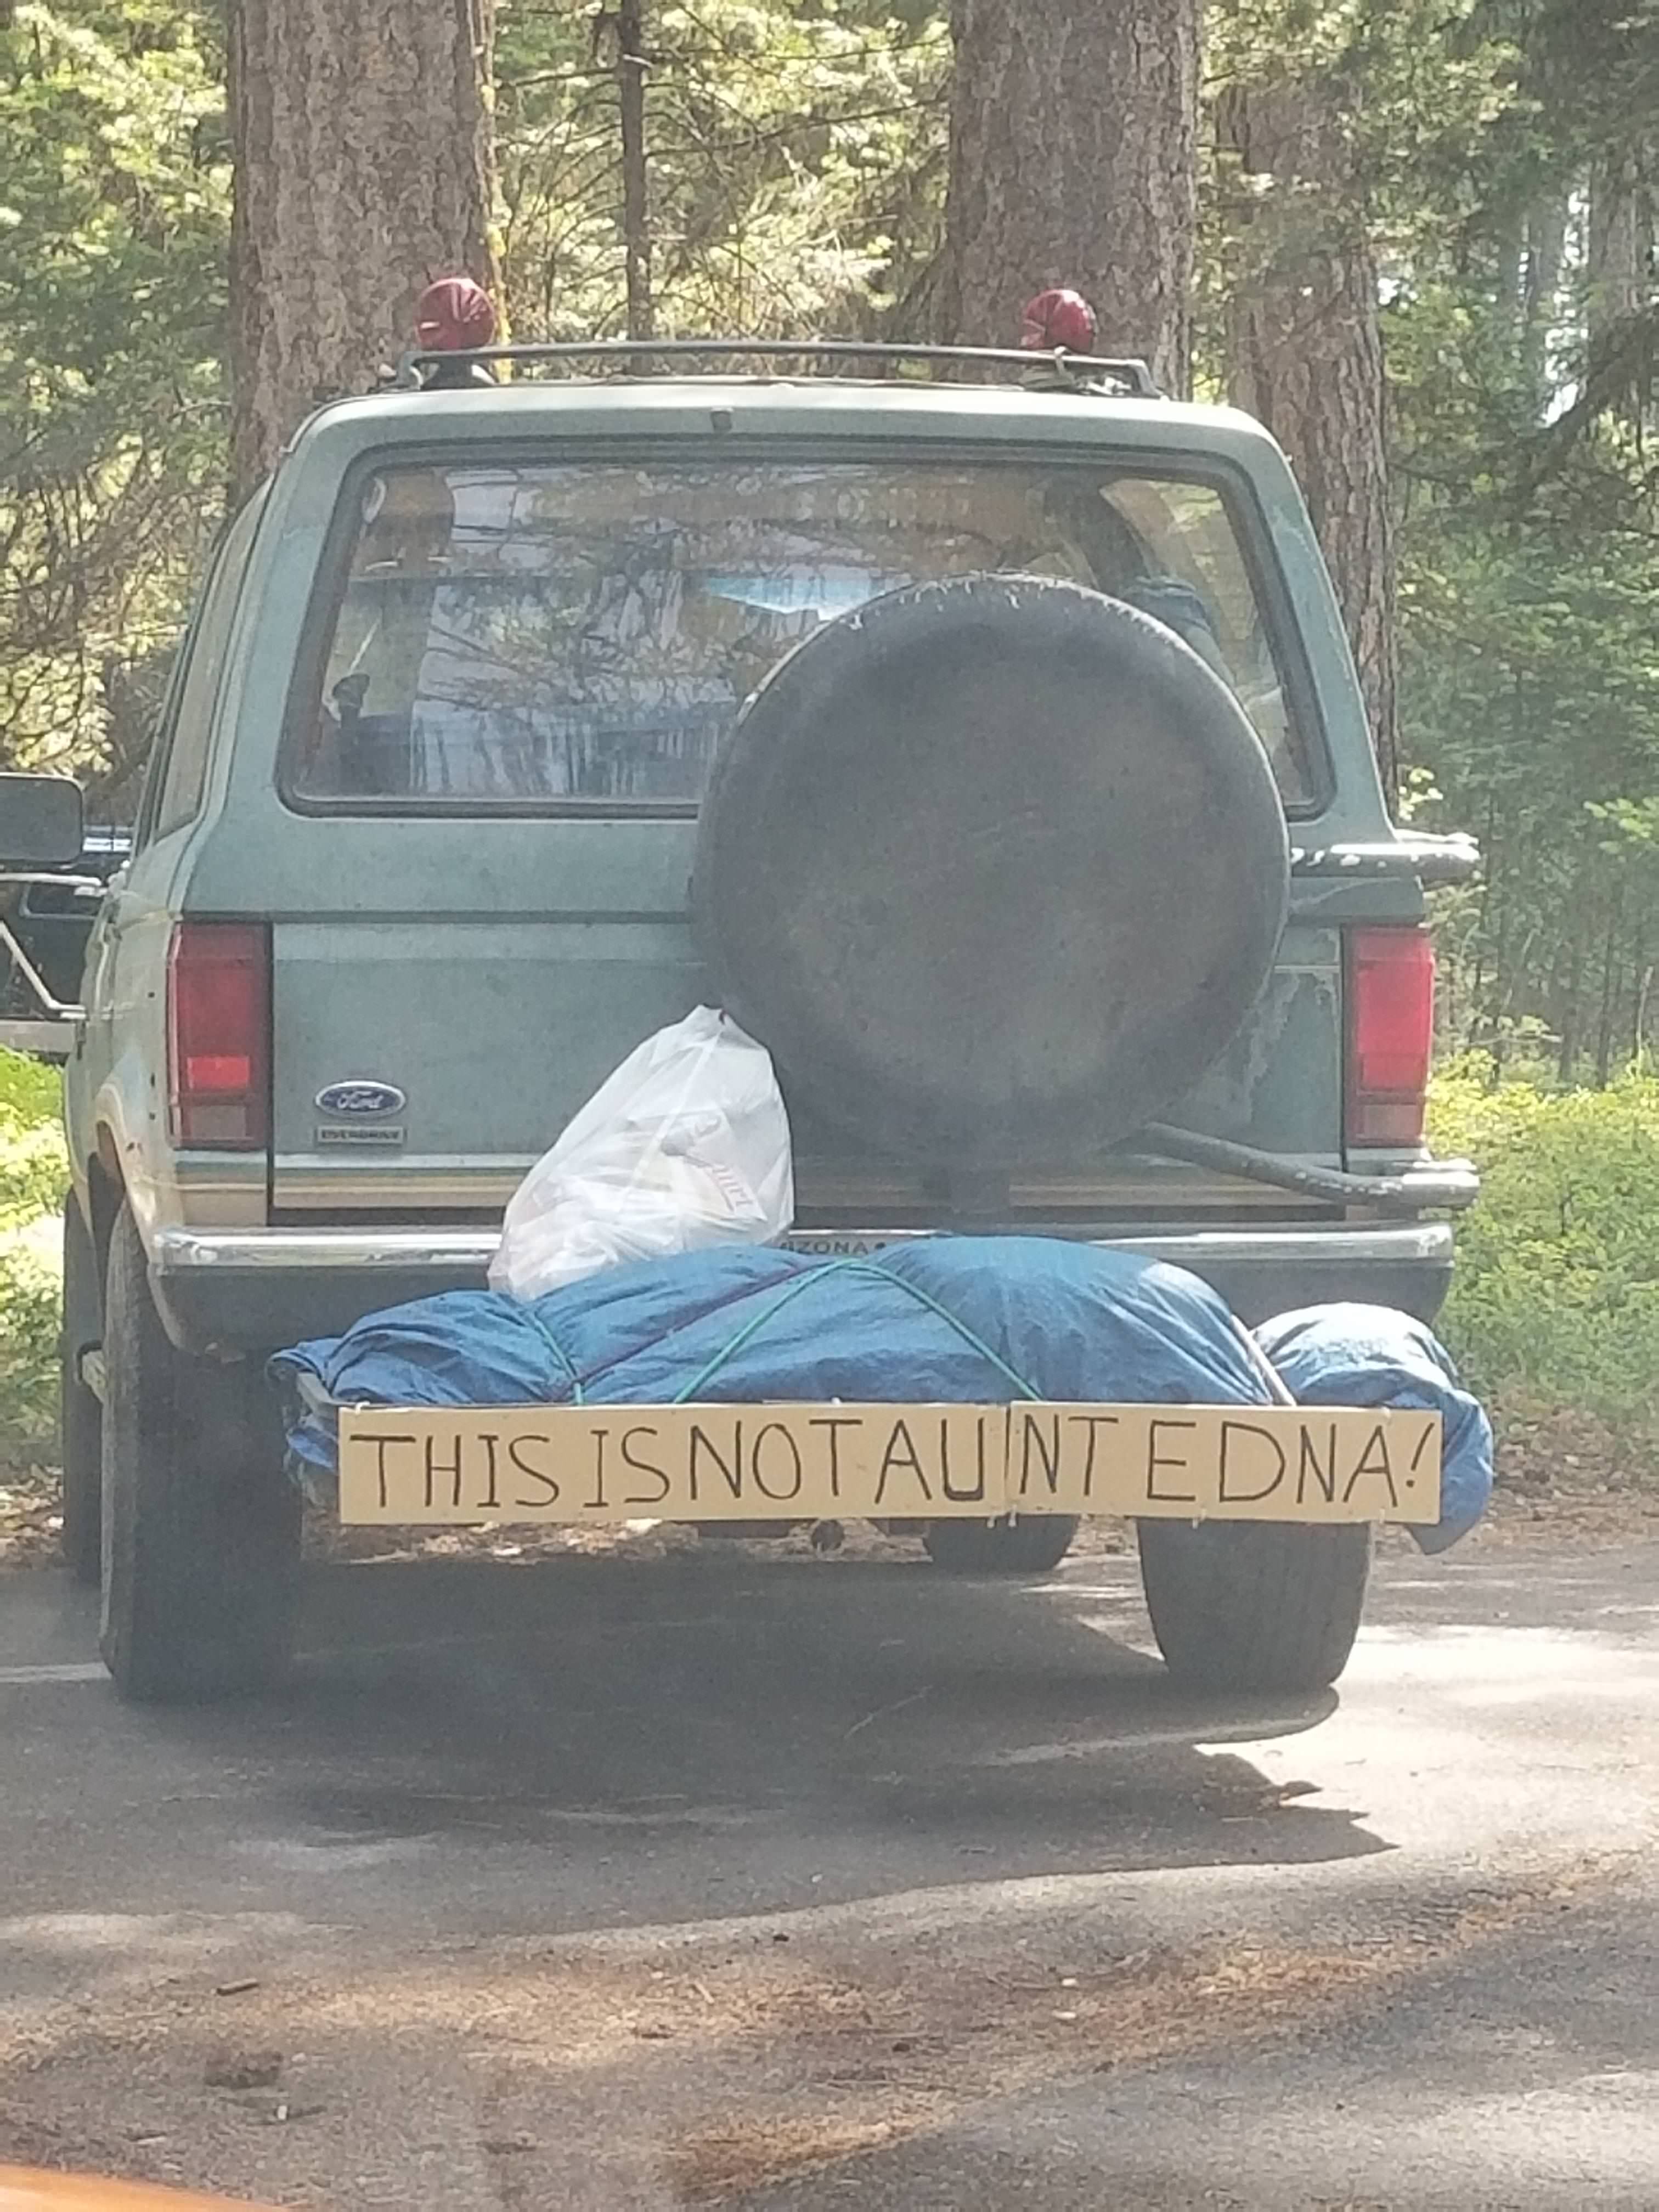 Camping car with clear sign that it is not their any on the back there.